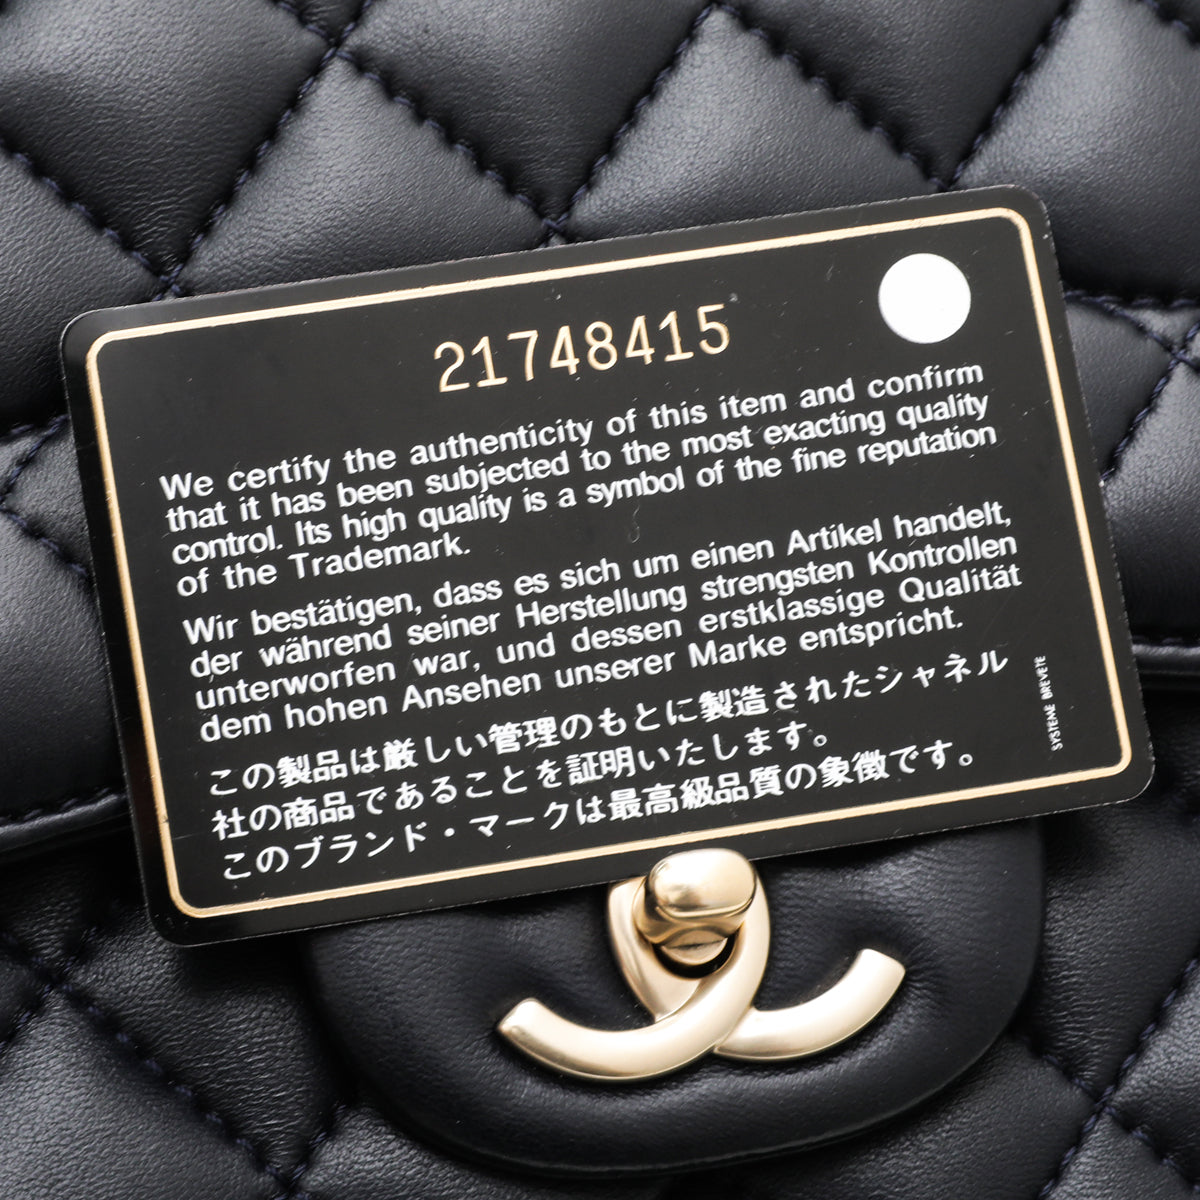 How To Spot Fake Chanel Bags | The Handbag Clinic